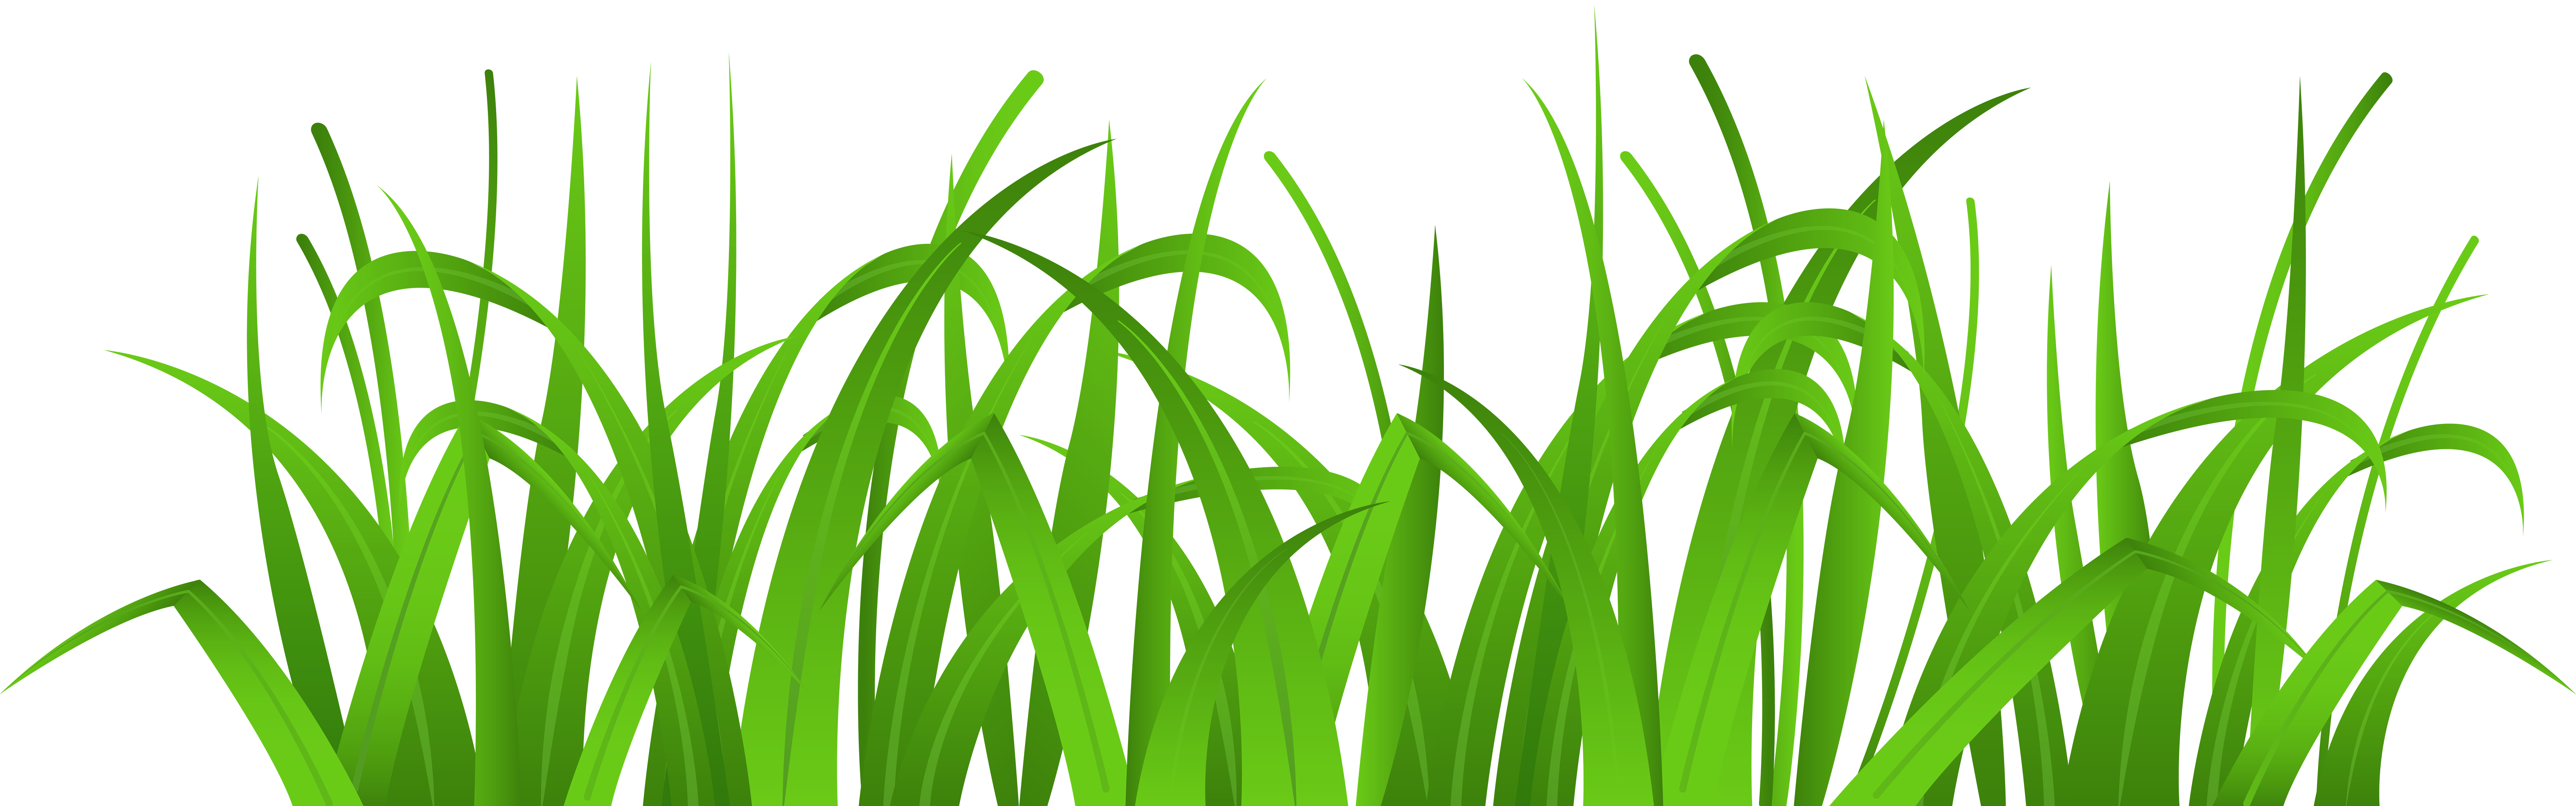 free grass pictures clip art - photo #46